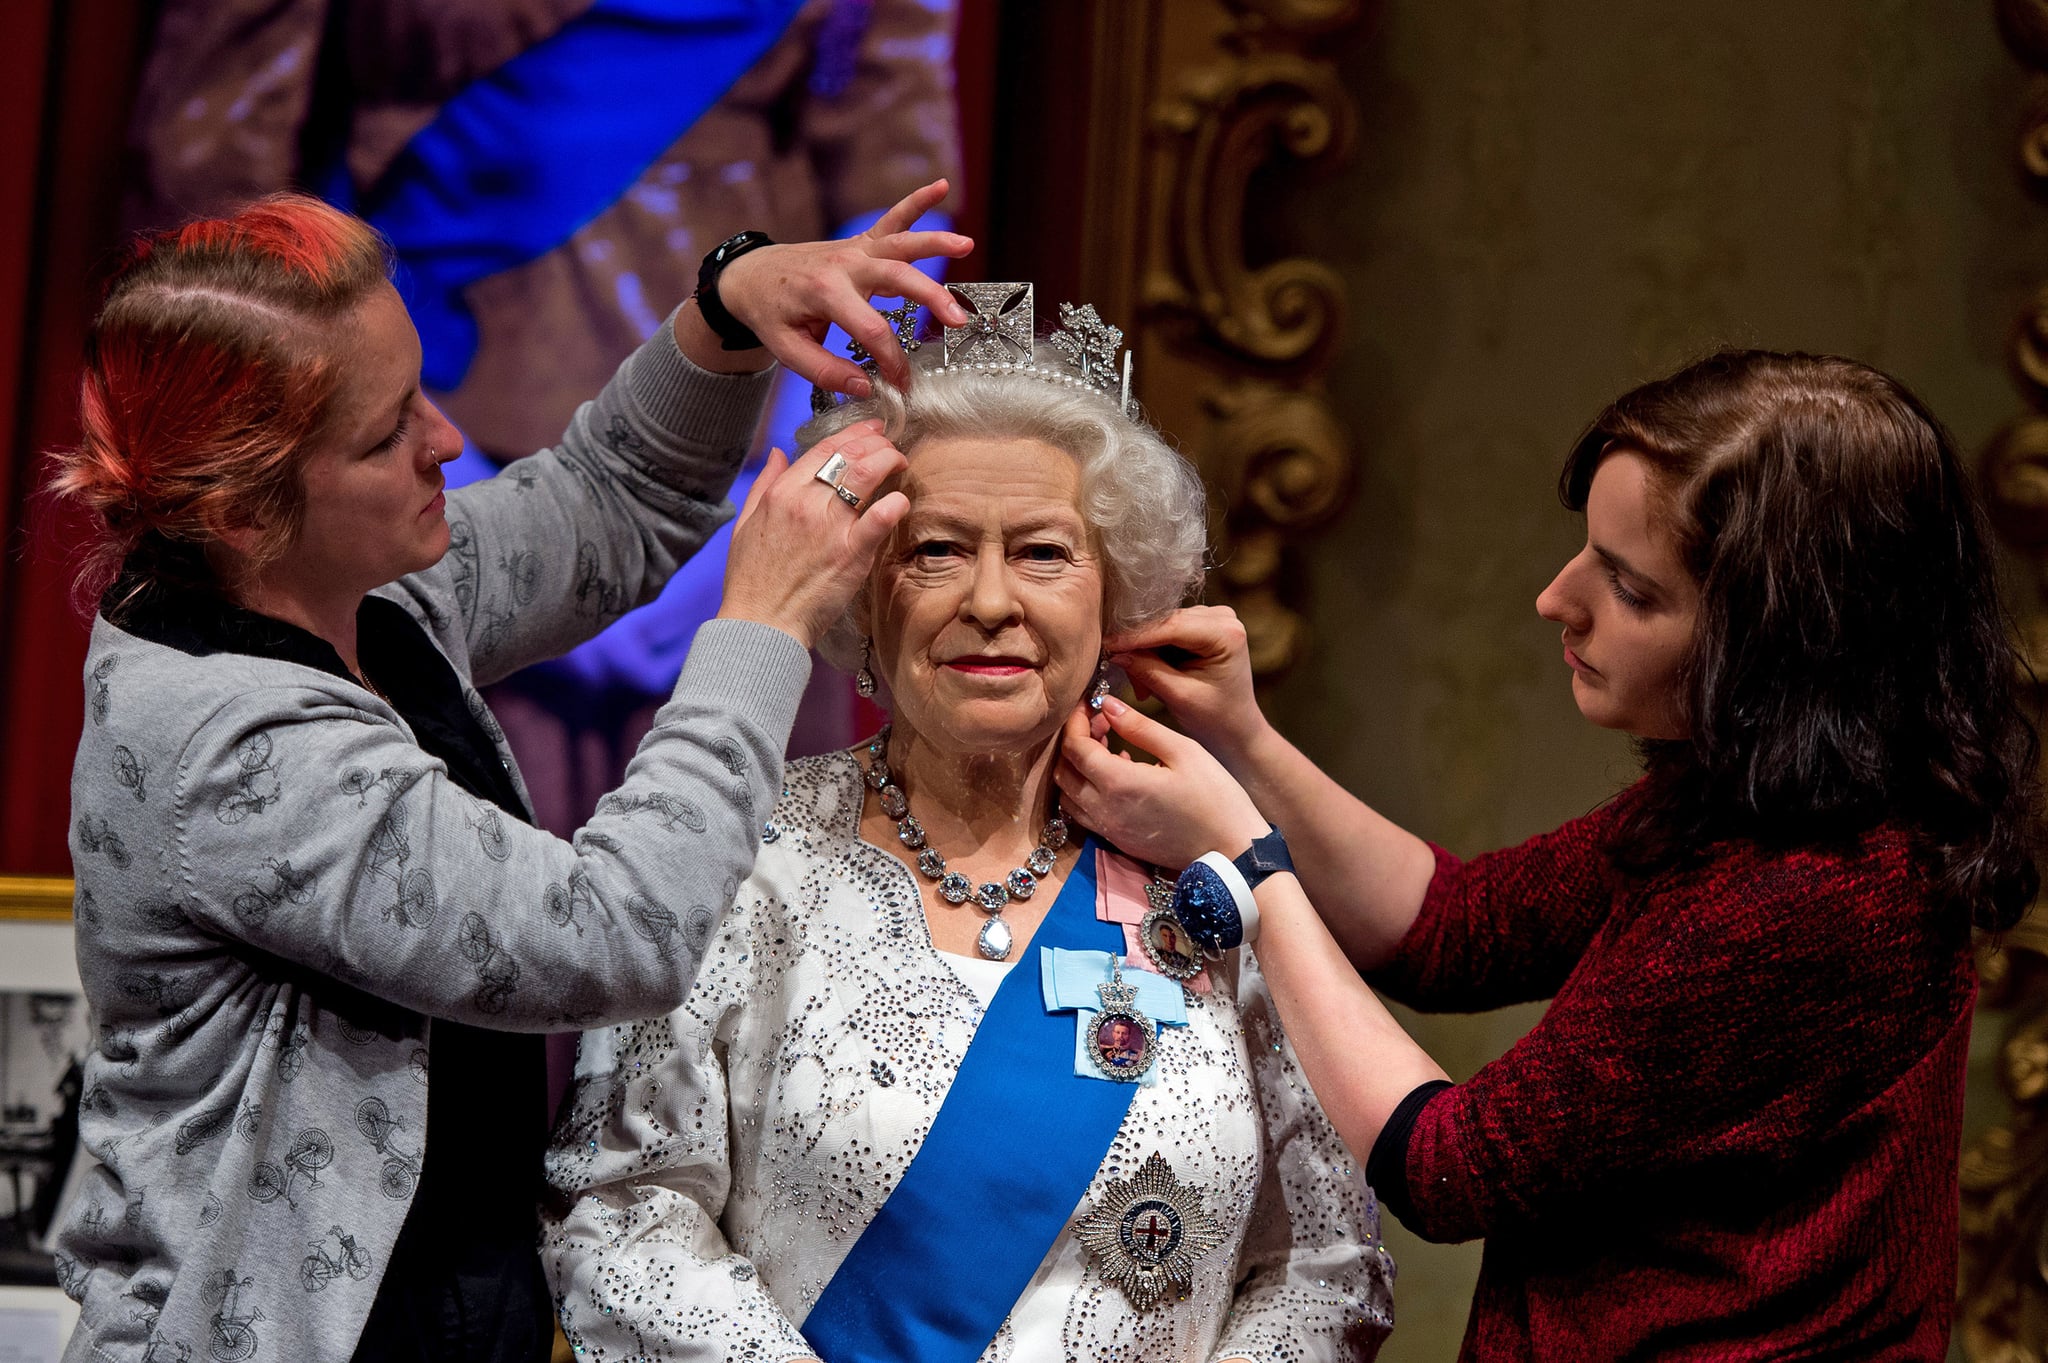 LONDON, ENGLAND - SEPTEMBER 07:  Madame Tussauds refreshes its Queen Elizabeth II wax figure with a recreation of the longest reigning monarch's diamond jubilee dress at Madame Tussauds on September 7, 2015 in London, England. The wax figure was updated after Buckingham Palace announced that on September 9, 2015 Queen Elizabeth II would surpass Queen Victoria as the longest reigning monarch.  (Photo by Ben Pruchnie/Getty Images)